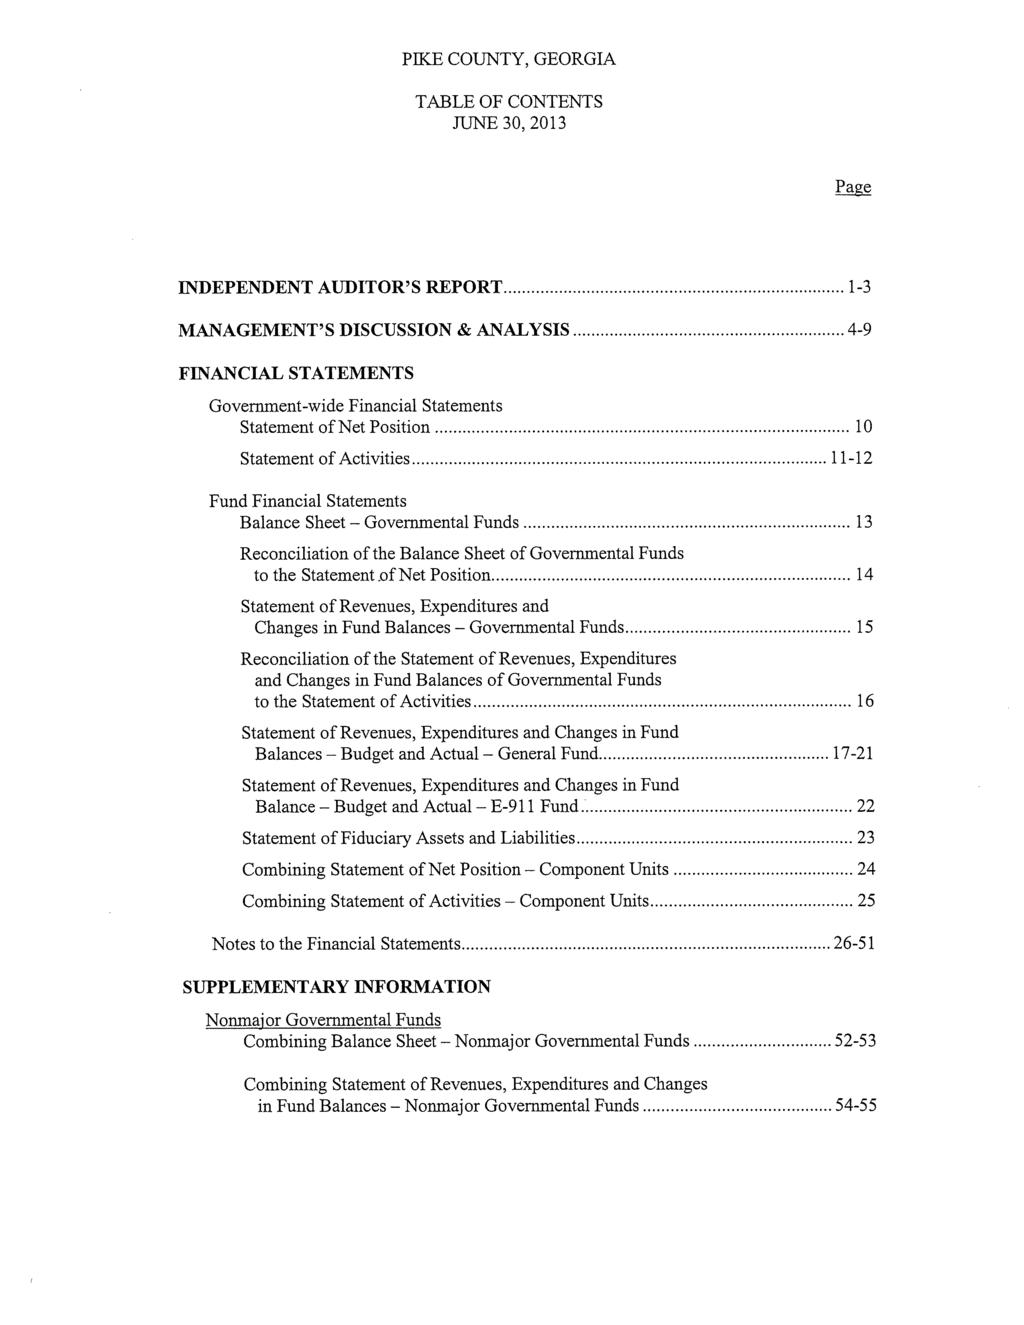 PIKE COU1~TTY, GEORGIA TABLE OF CONTENTS JUNE 30, 2013 INDEPENDENT AUDITOR S REPORT 1-3 MANAGEMENT S DISCUSSION & ANALYSIS 4-9 FINANCIAL STATEMENTS Government-wide Financial Statements Statement of